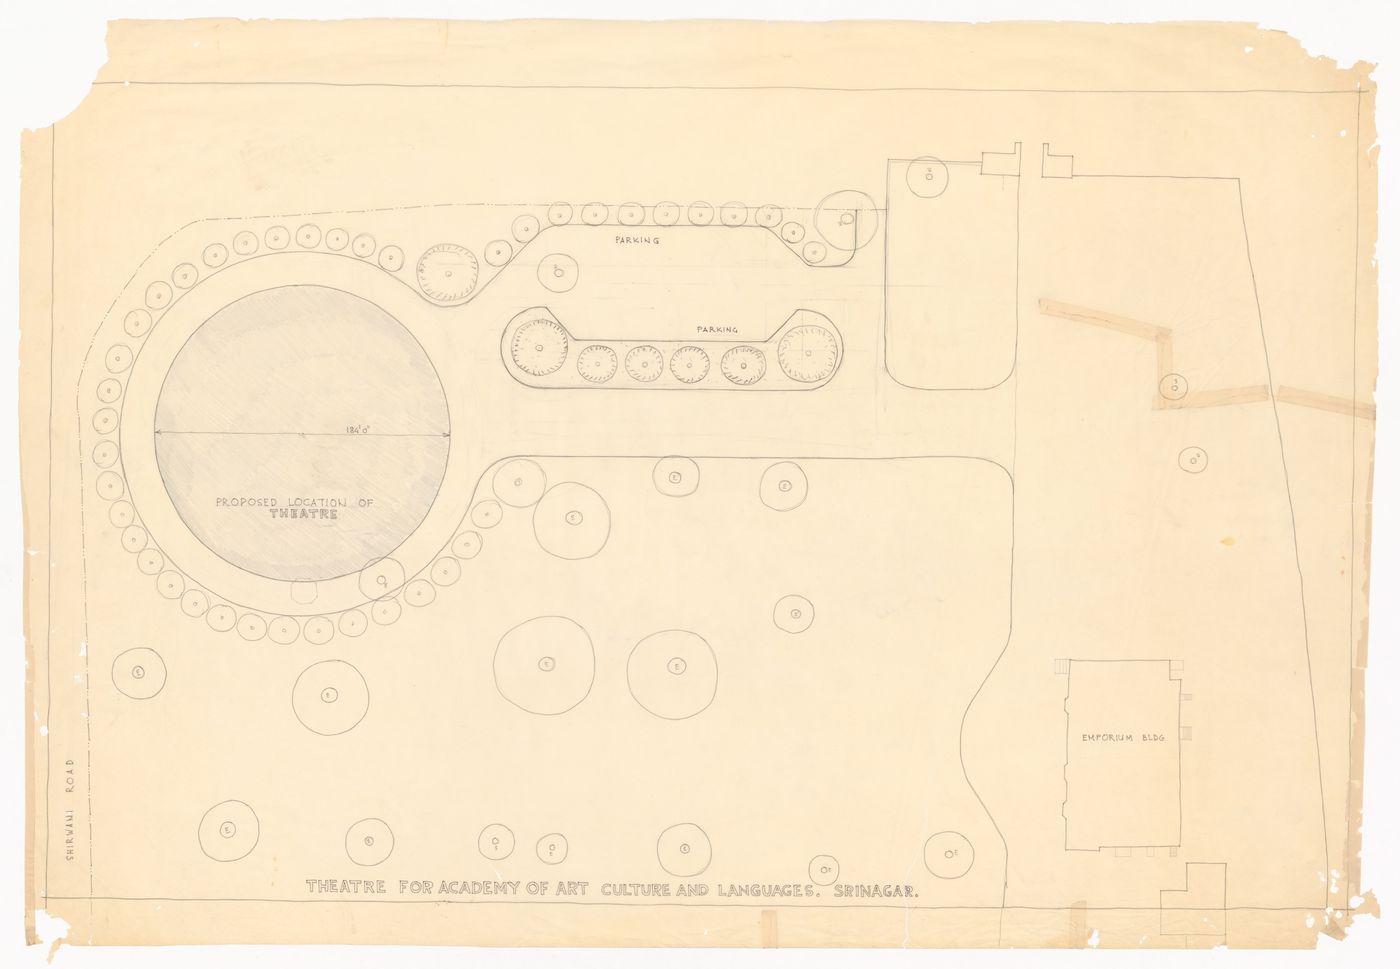 Site plan for the theatre for J&K Academy of Art, Culture and Languages, Srinagar, India